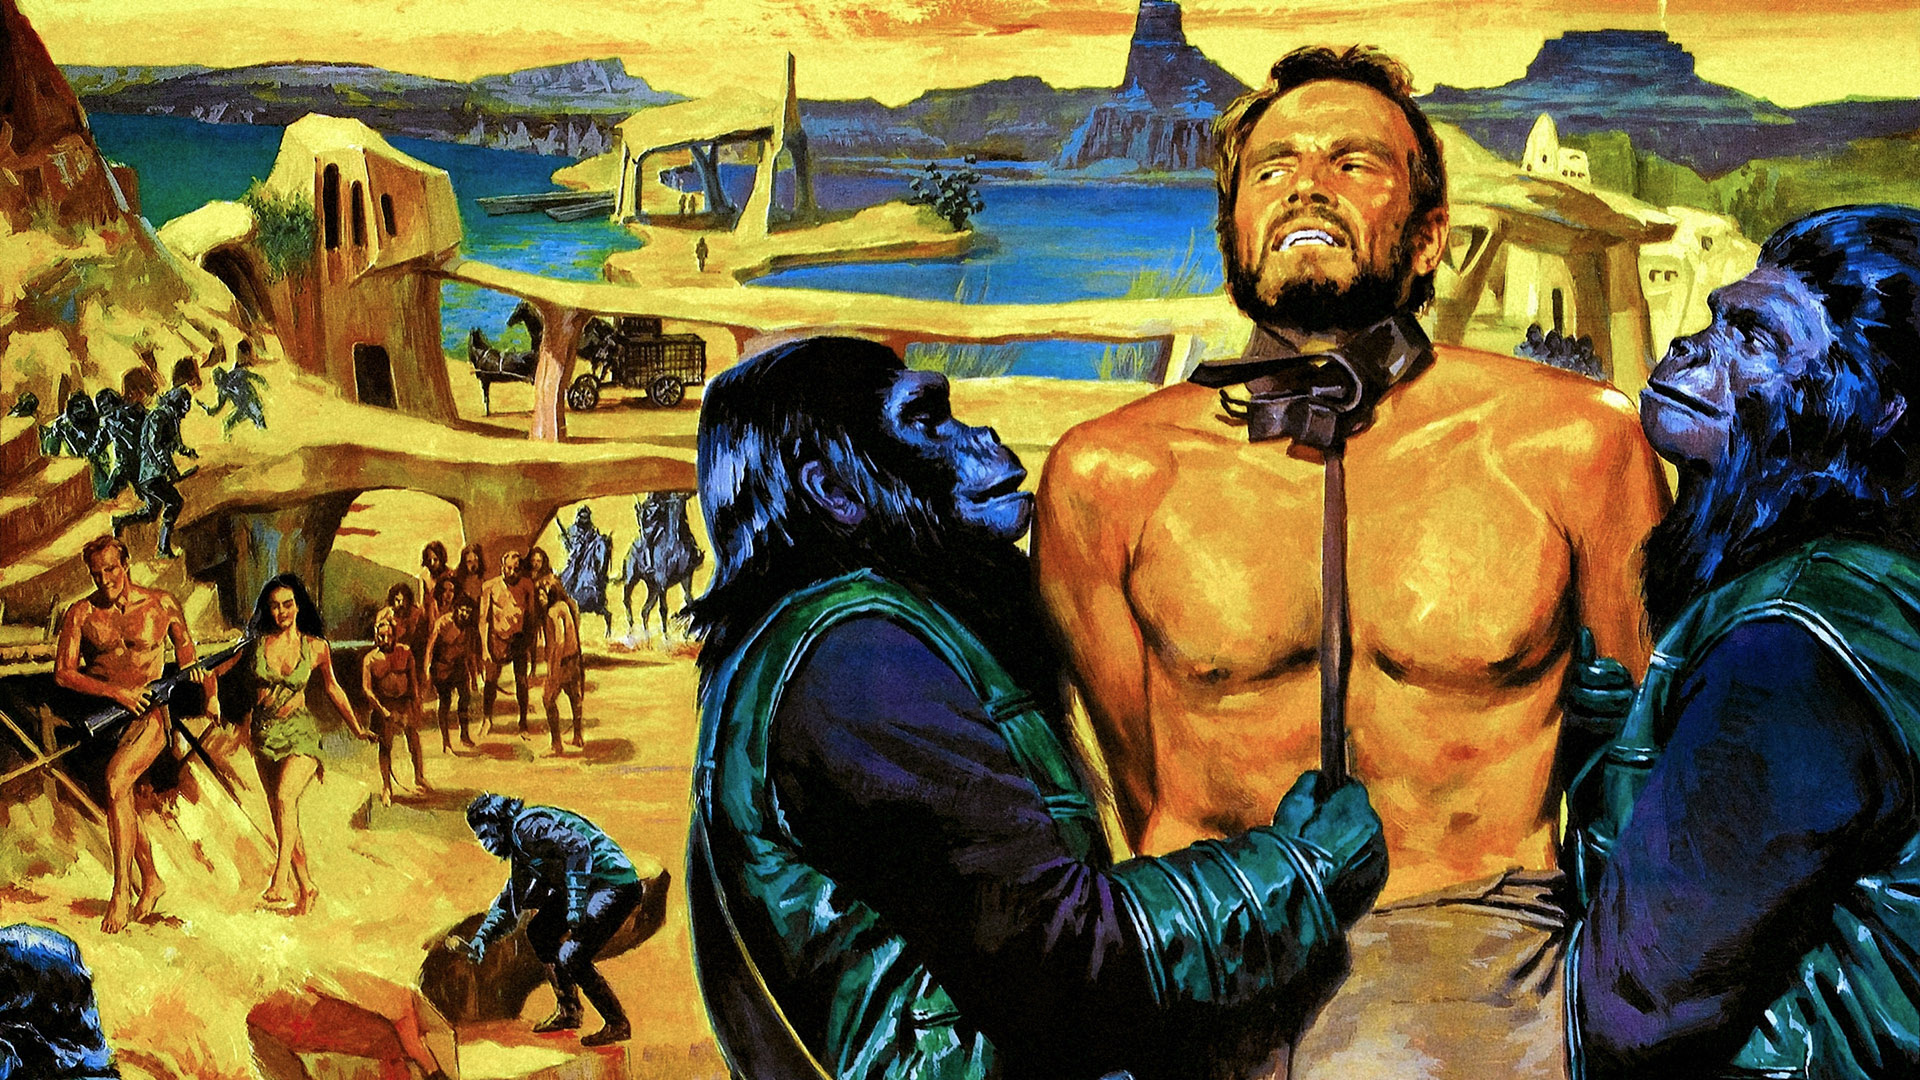 Planet of the Apes (1968) Art